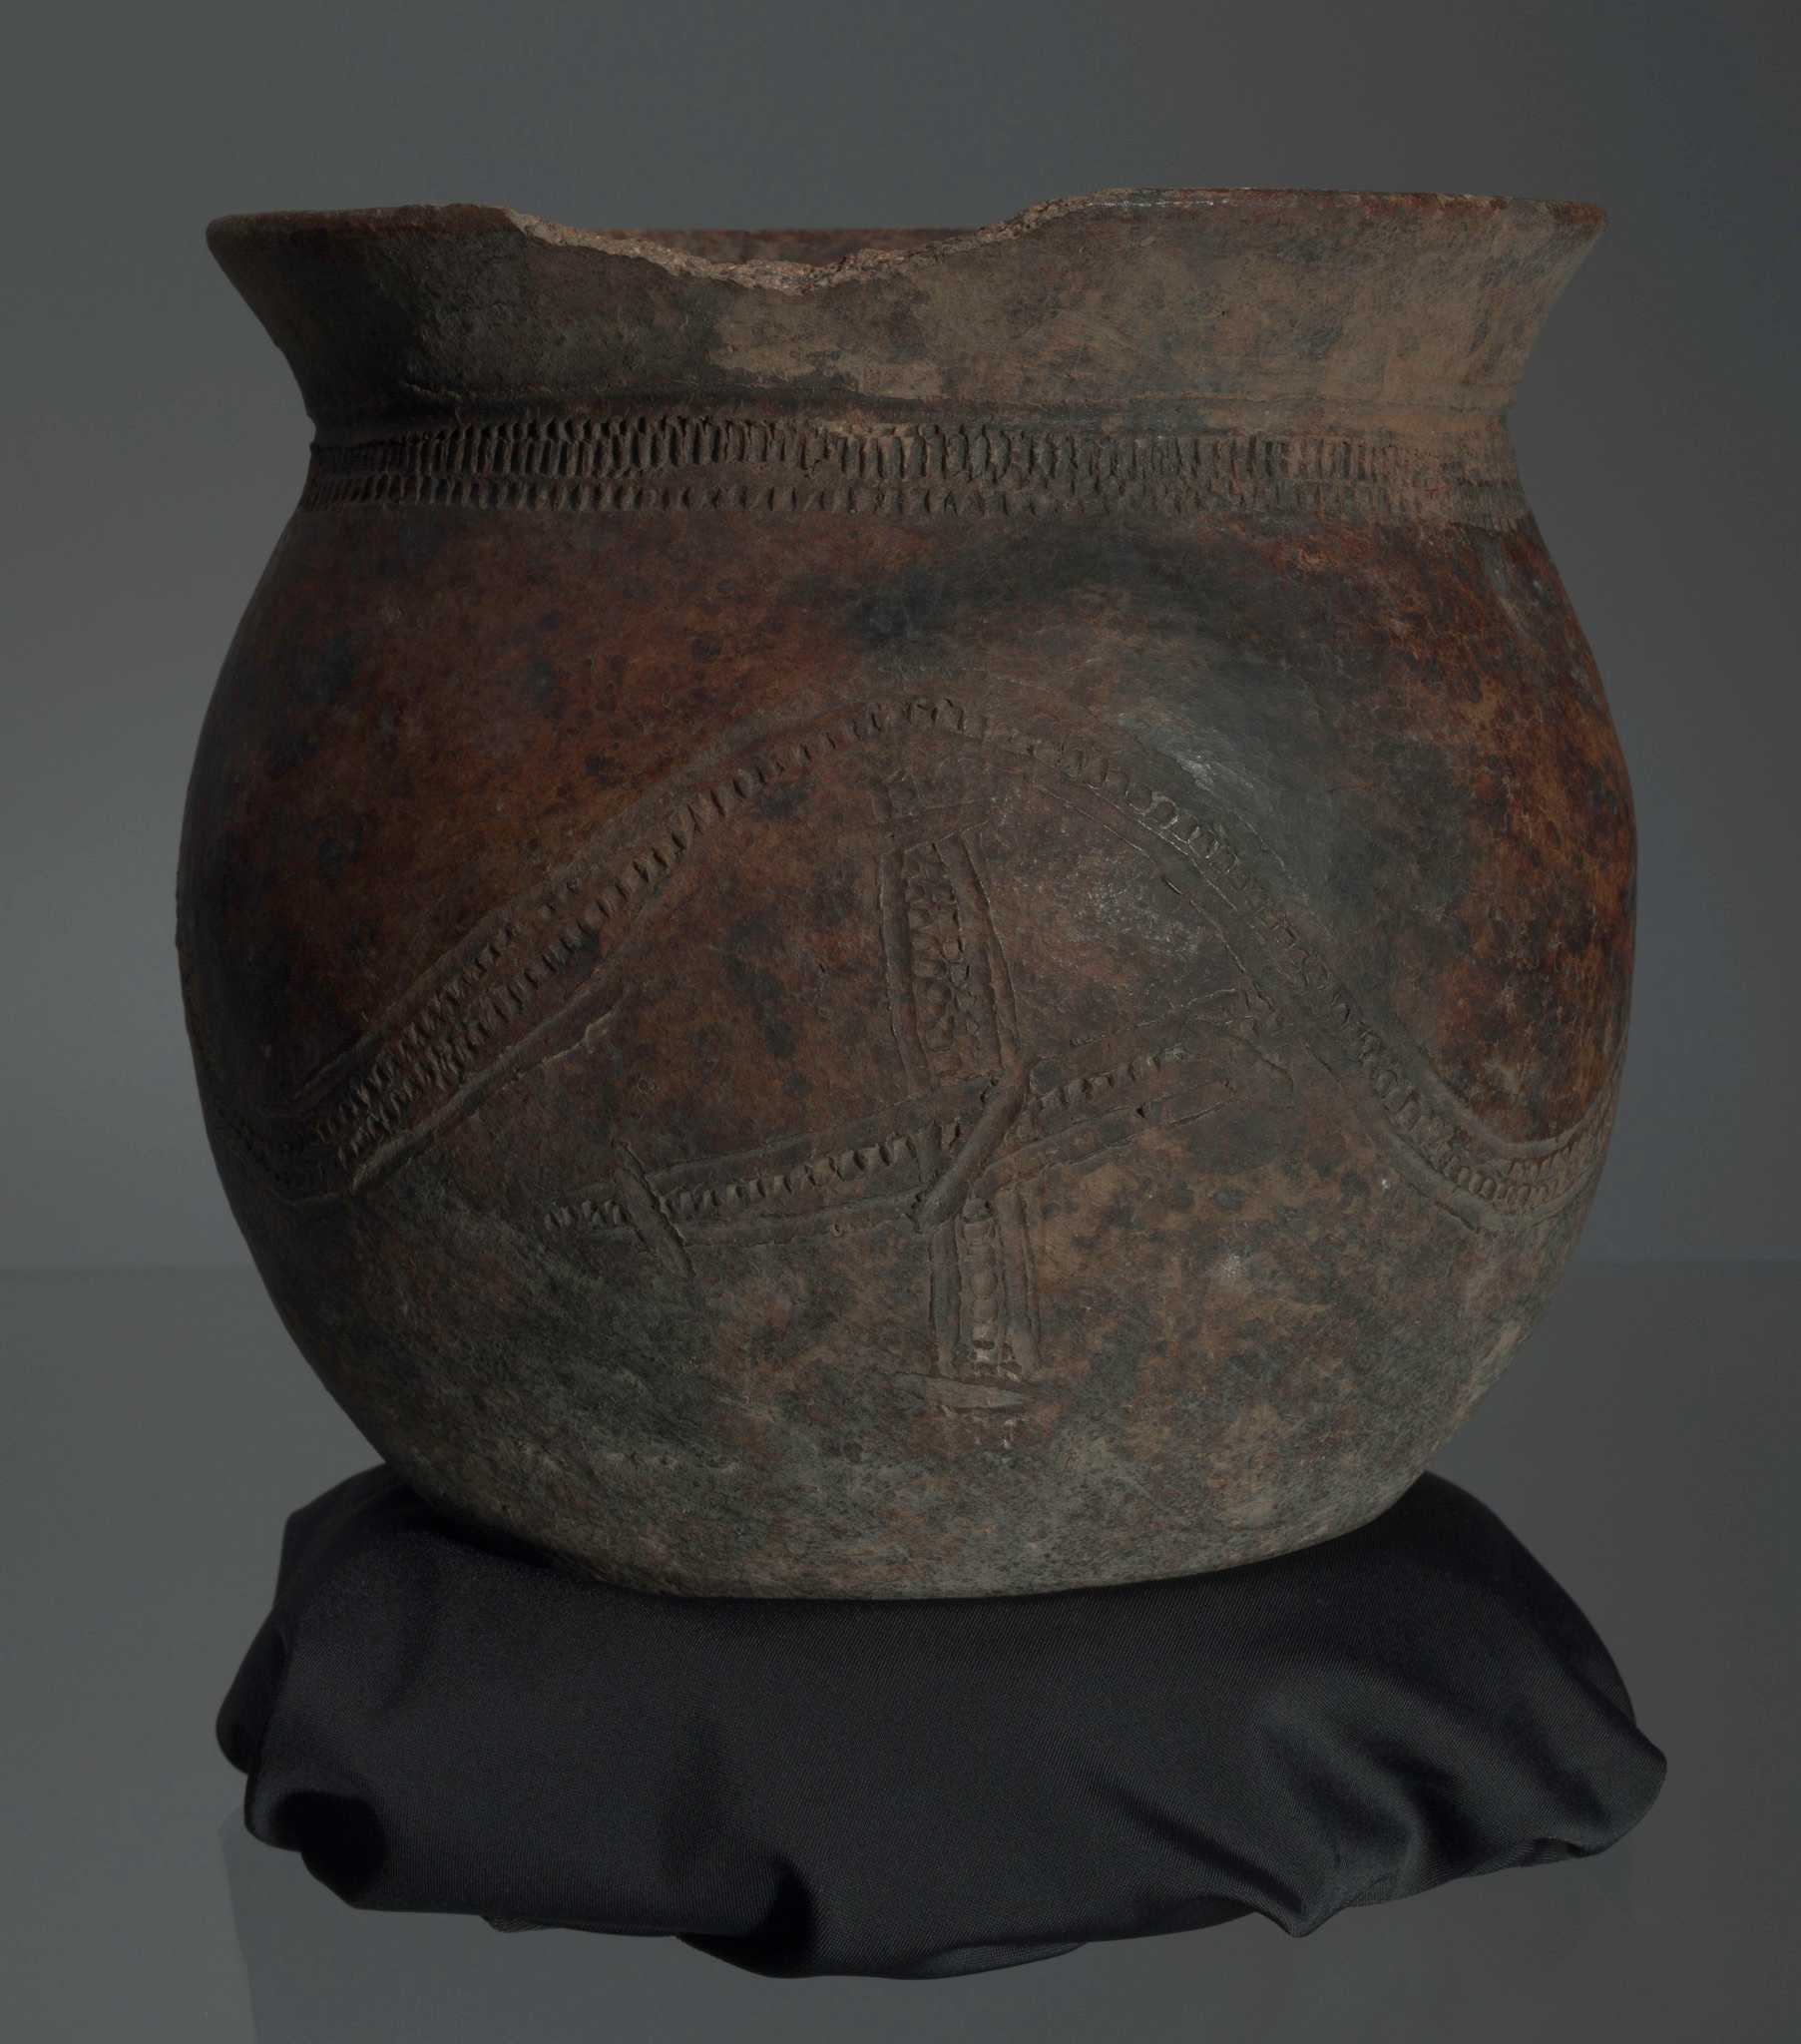 Photograph of African Pottery with Cosmogram markings